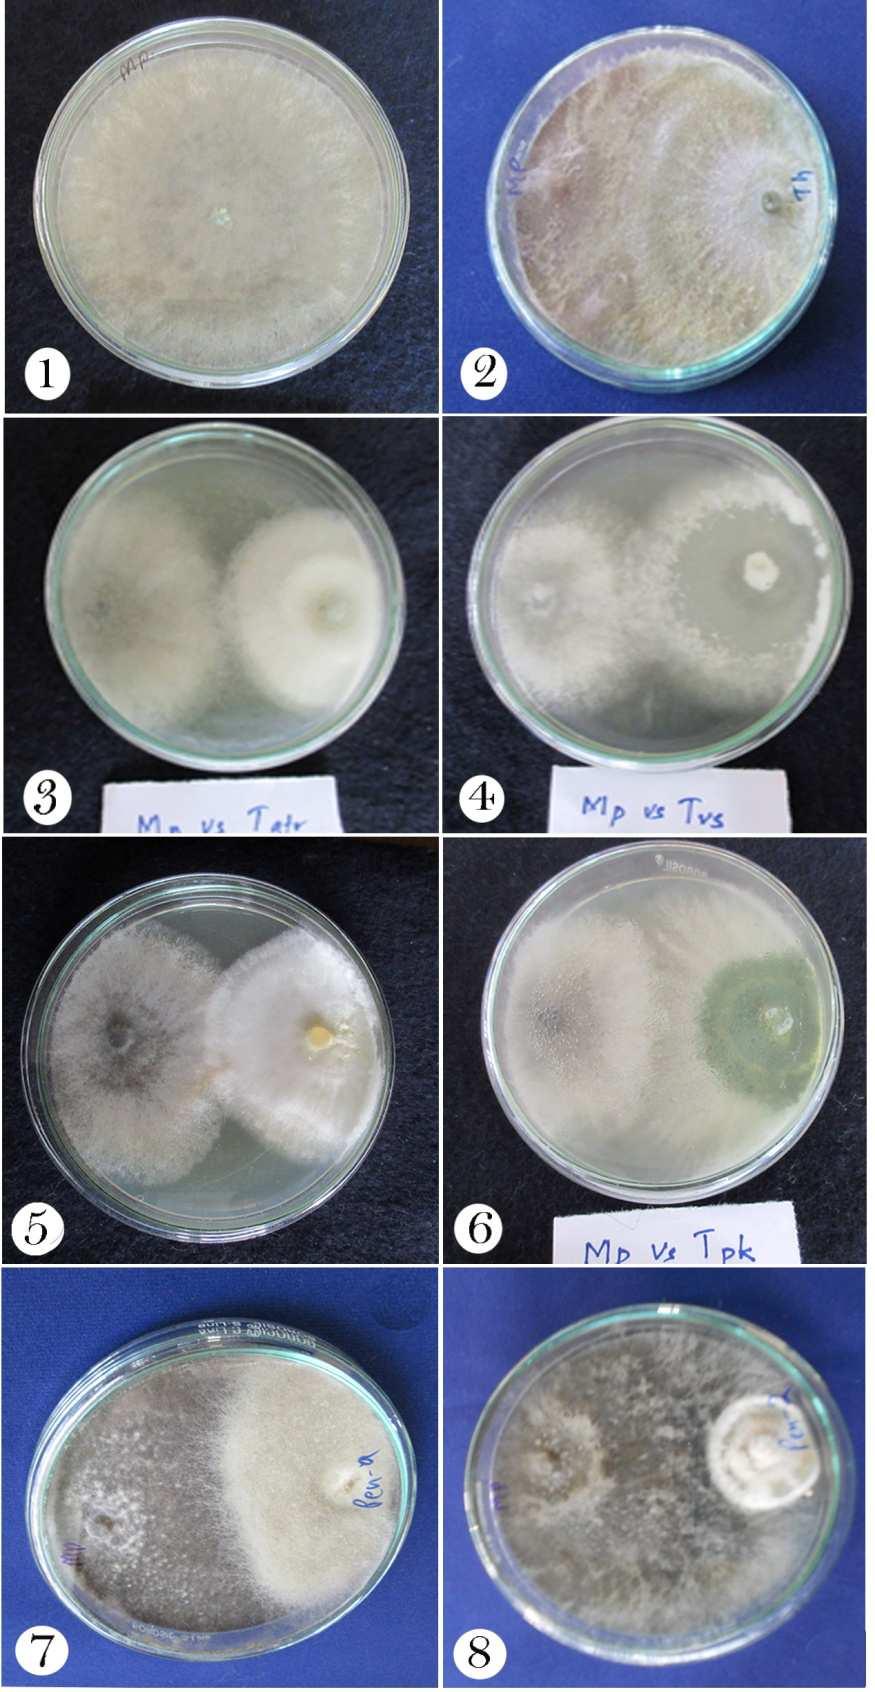 Plate 1. Antagonistic efficacy of different species of Trichoderma and Penicillium against Mp in Dual Culture Plate method. Figs 1- Mp in control; 2- Mp vs. T. harzianum; 3- Mp vs T.